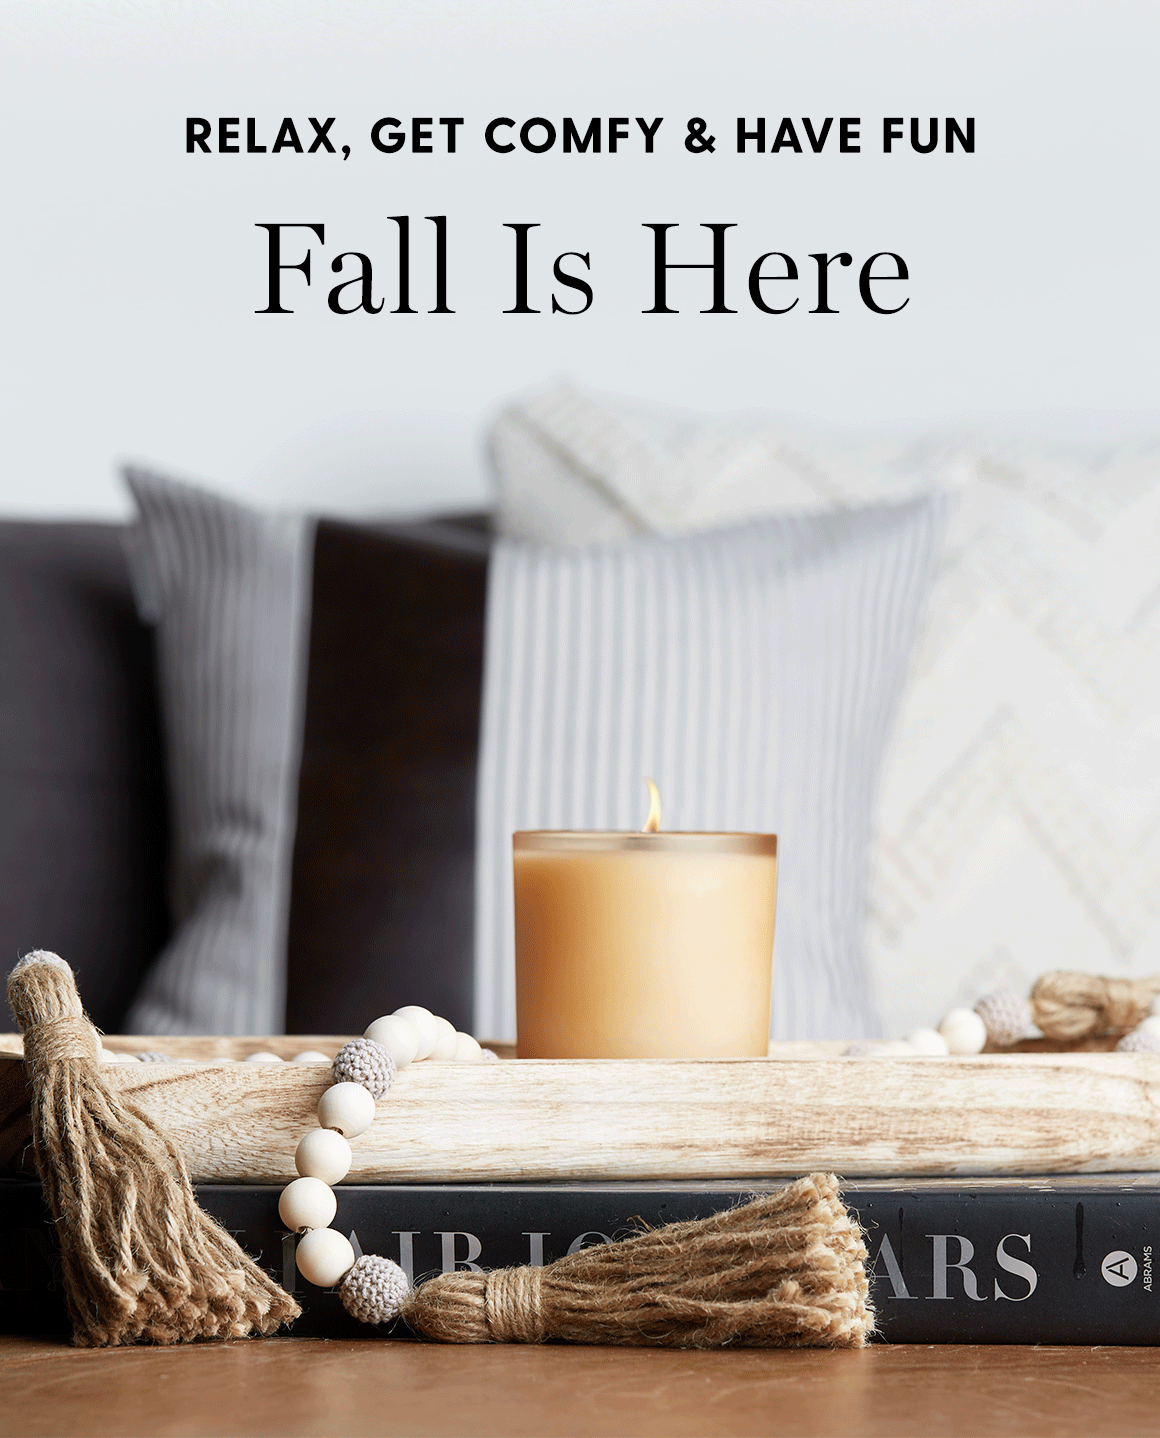 Relax and get comfy. Fall is here.